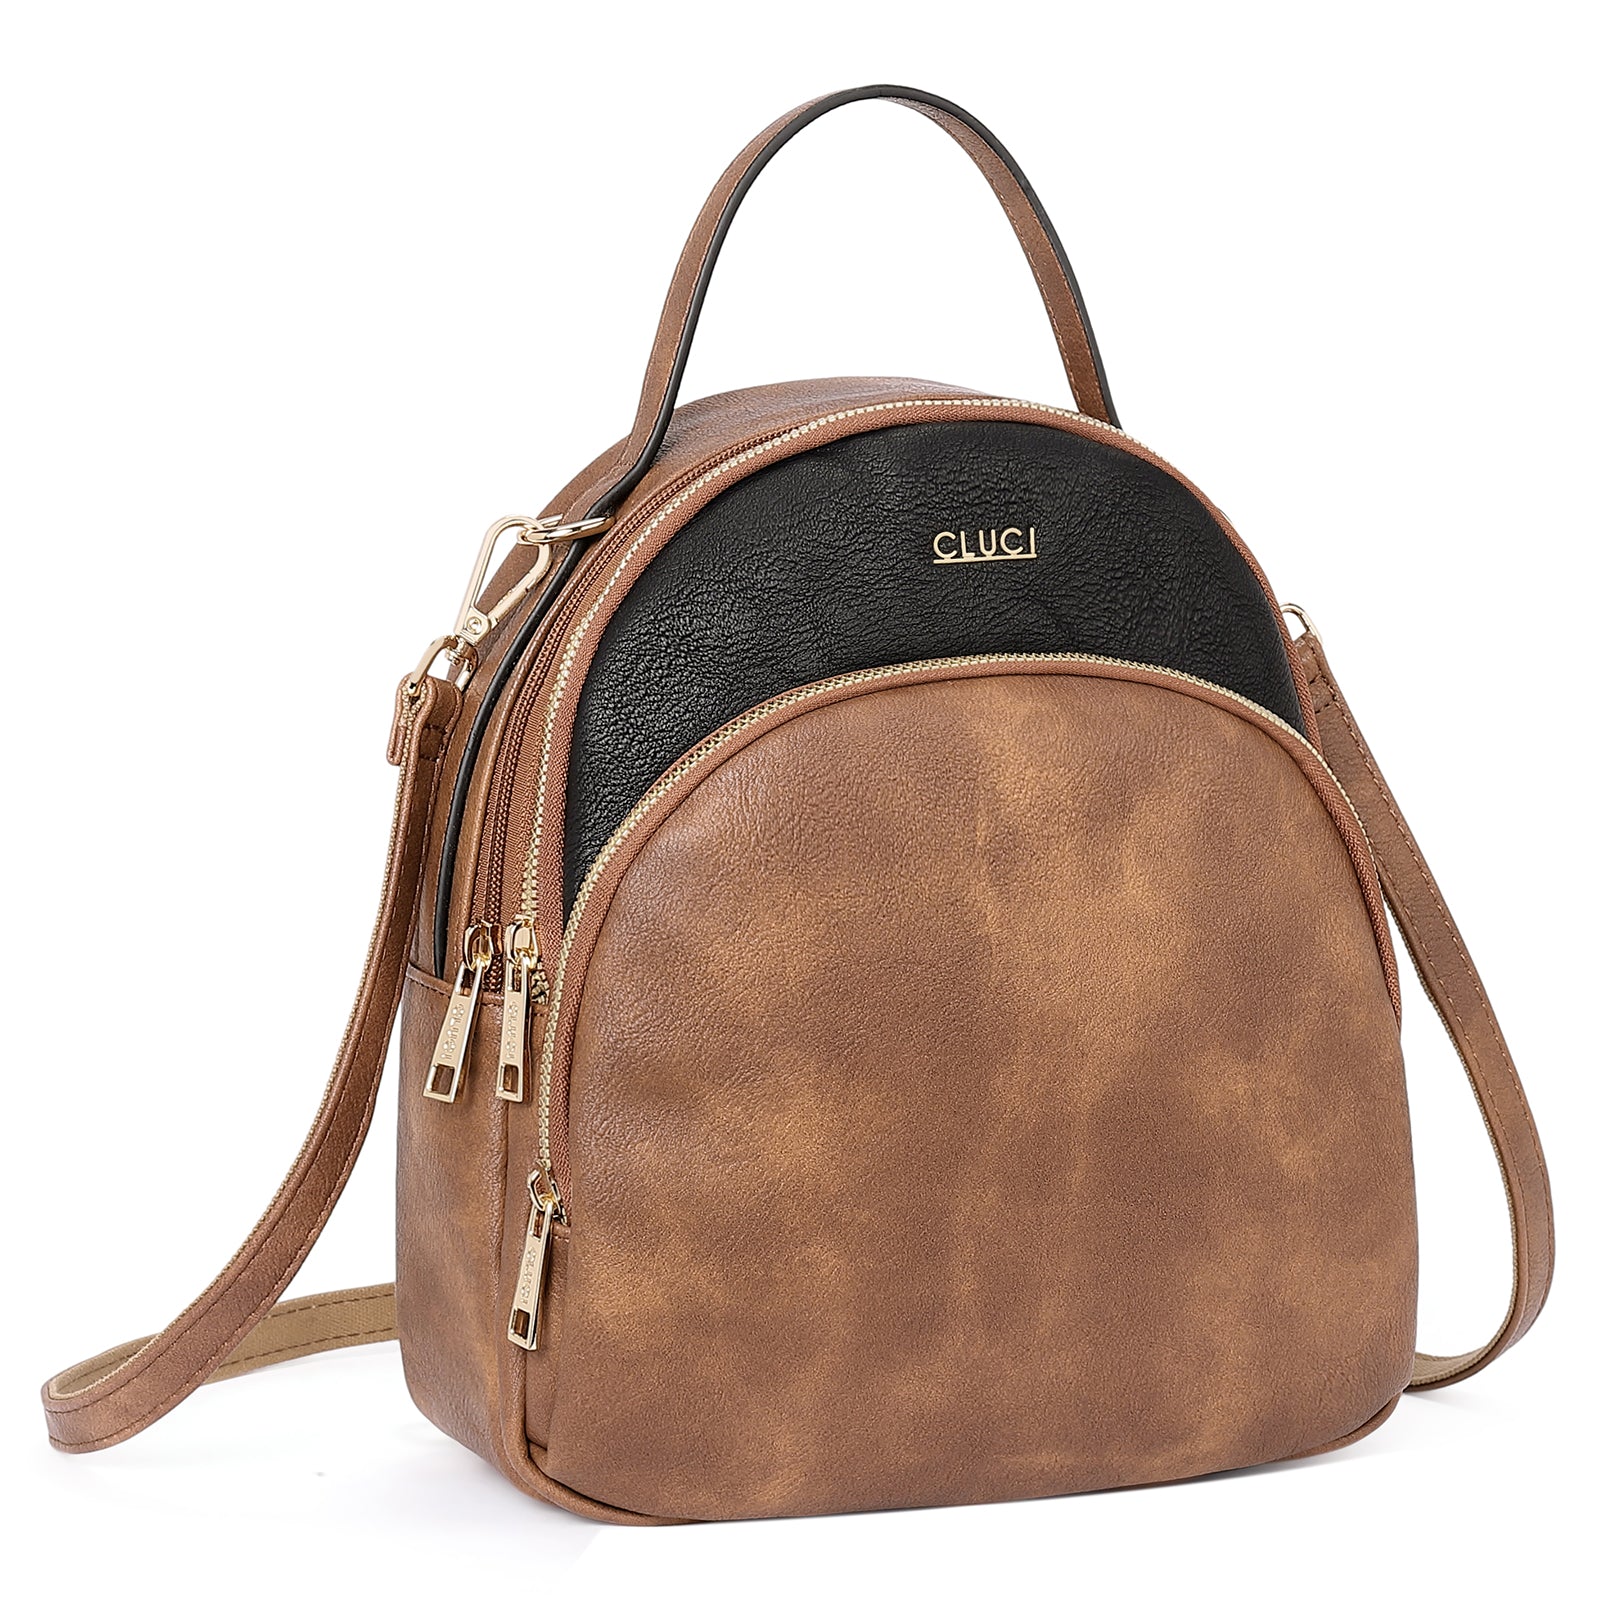 Small Backpack for Women Fashion PU Leather Daypack Casual